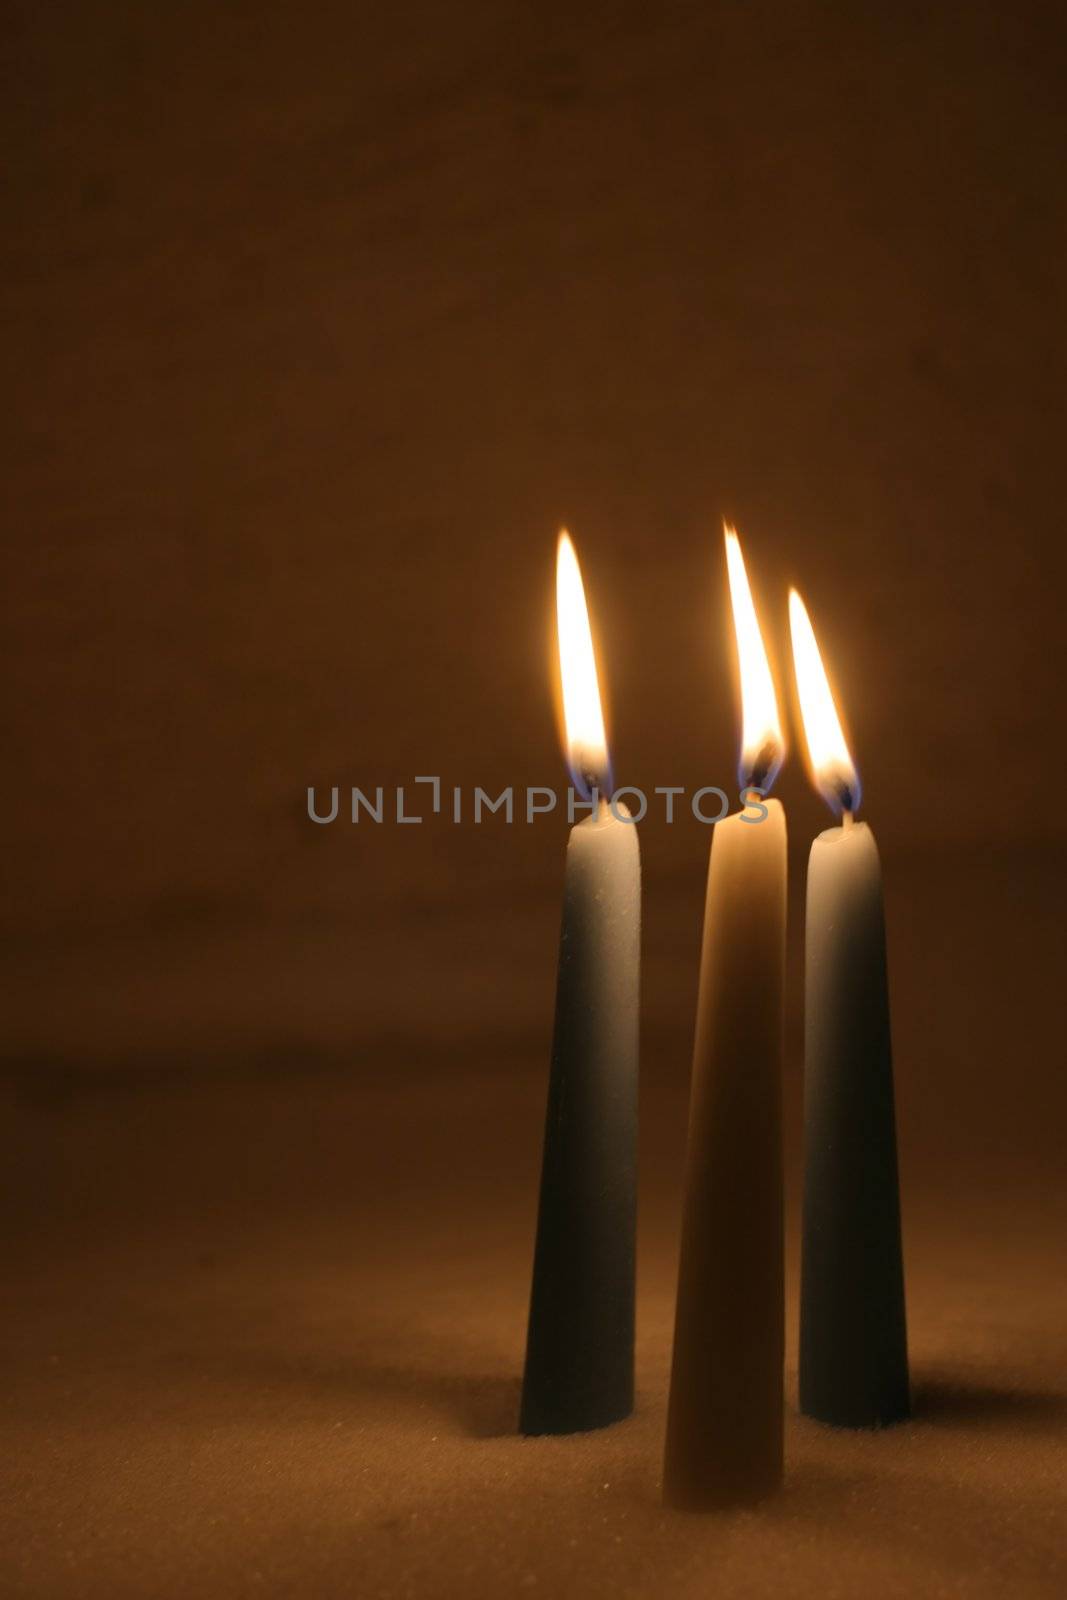 Closeup of burning candles outside in winter time